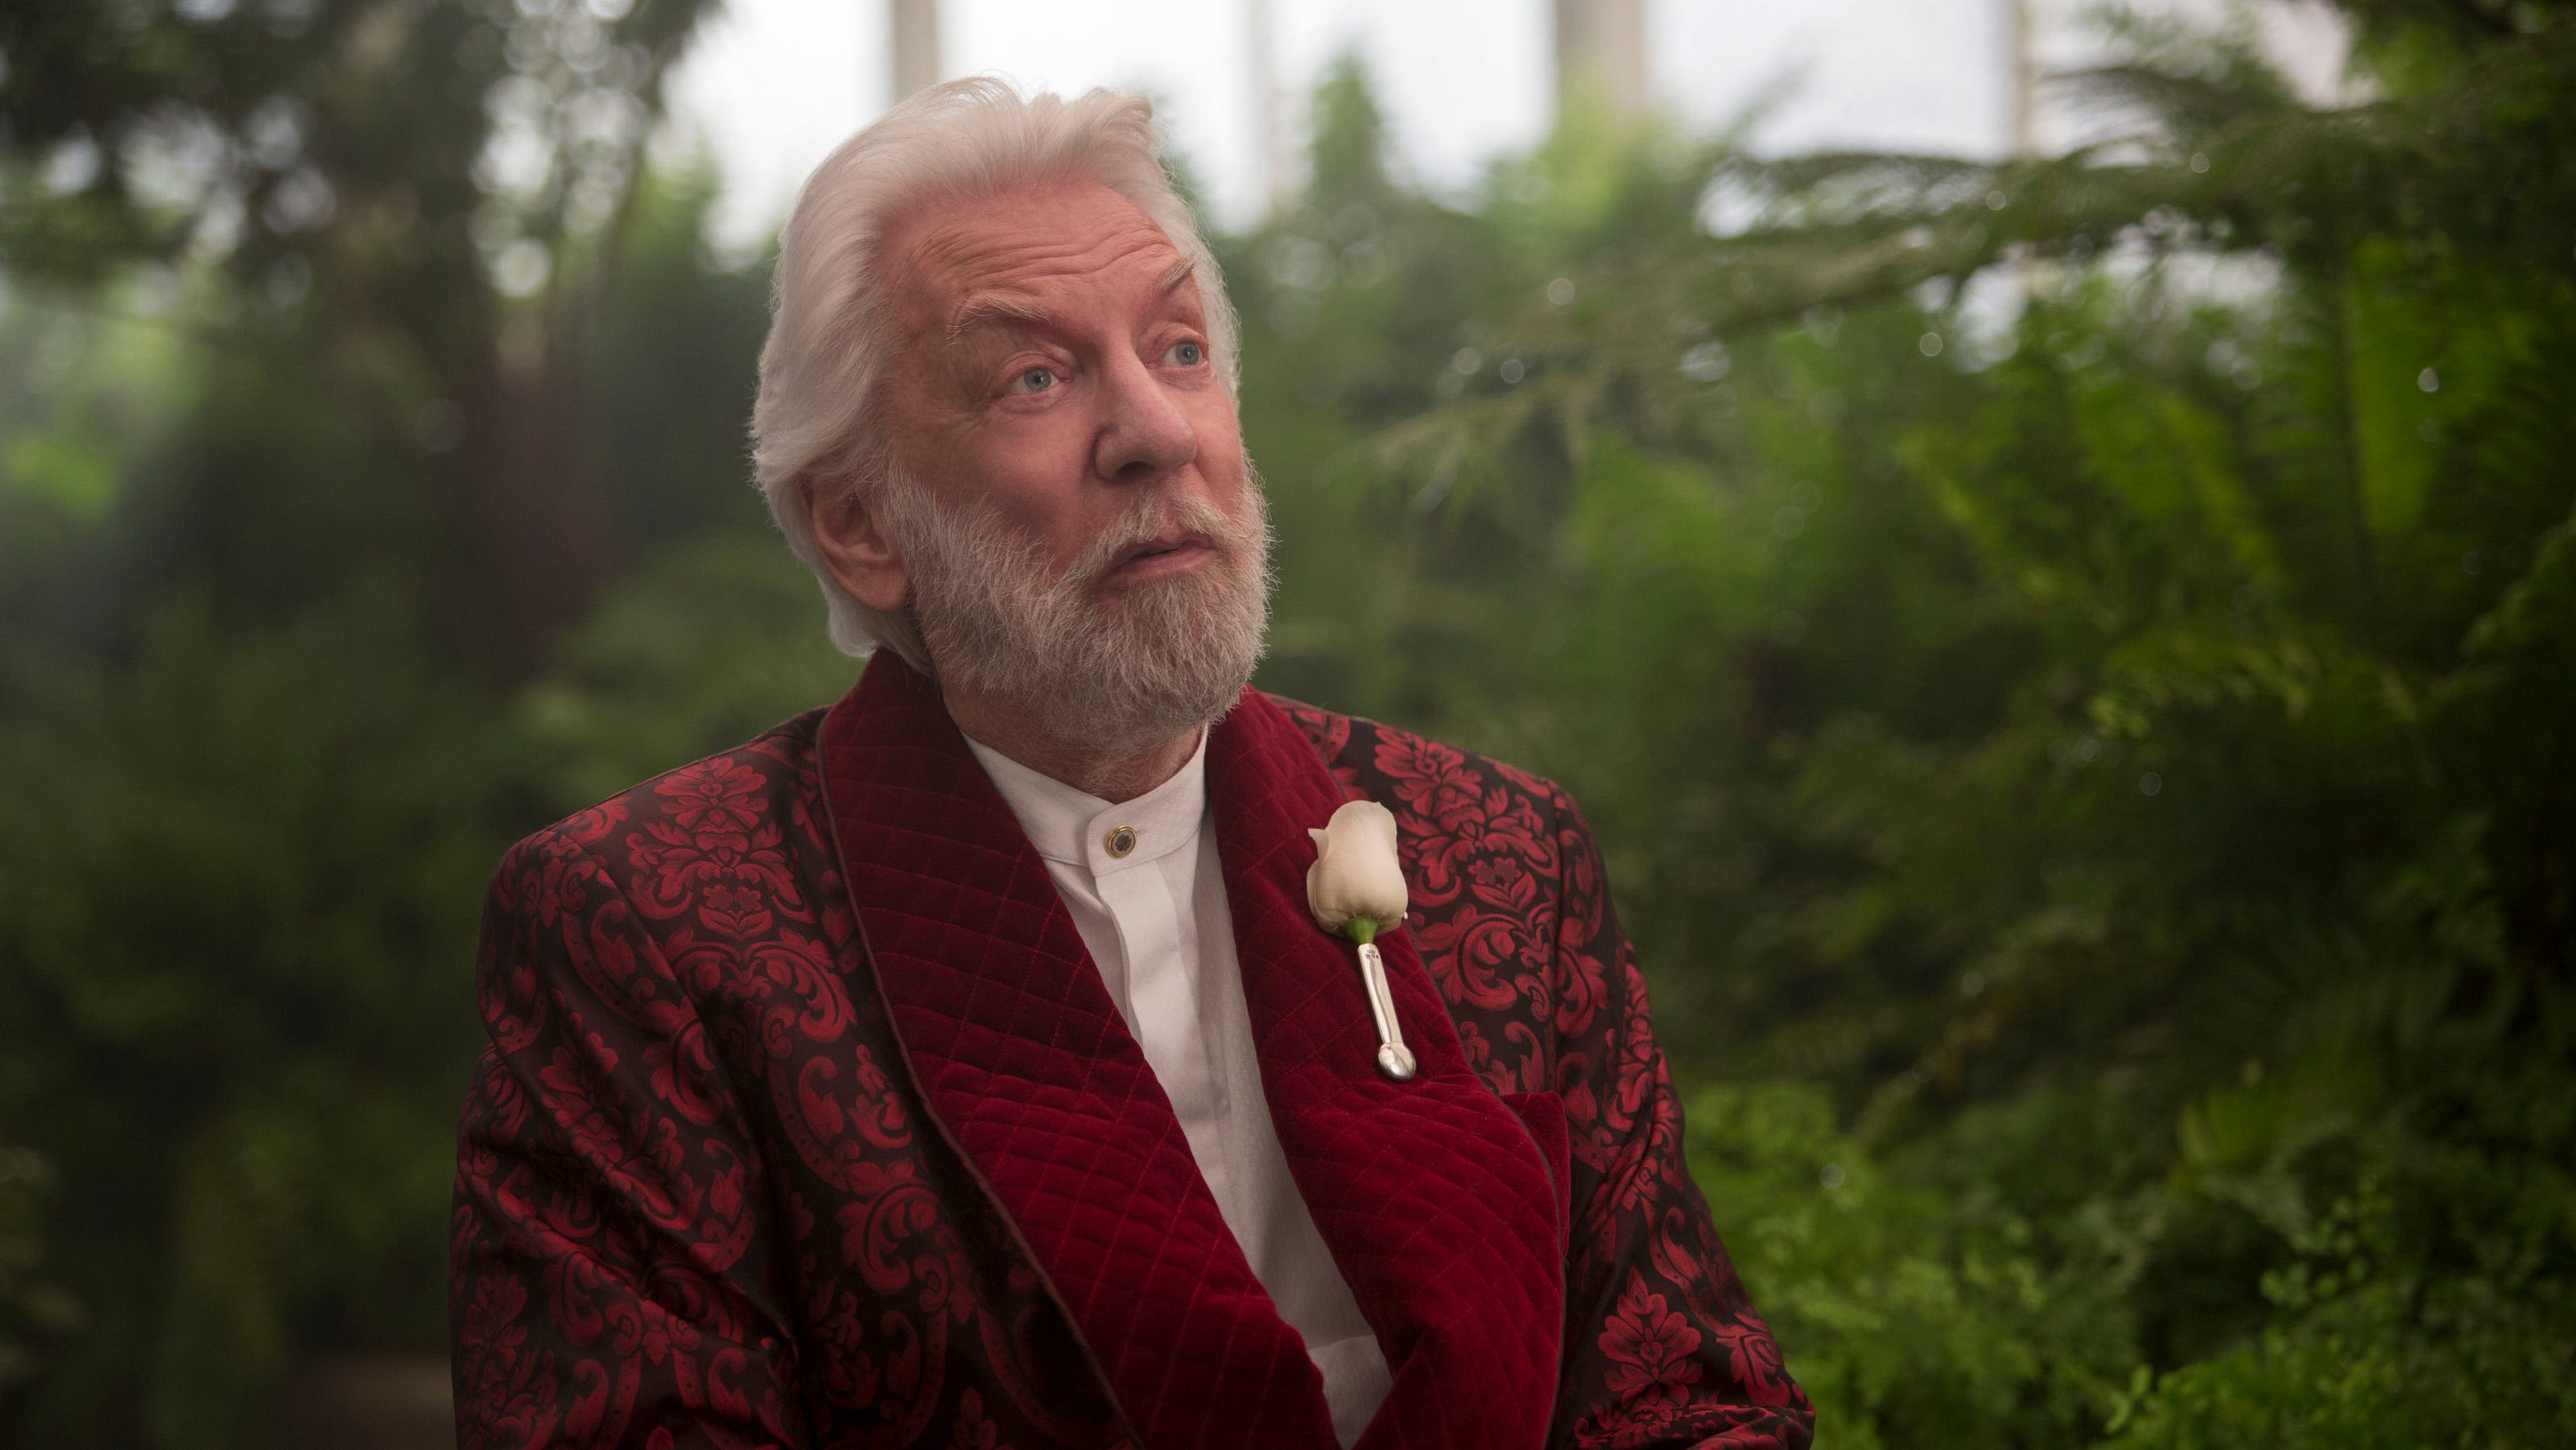 Beloved actor and Florida resident Donald Sutherland dies at 88